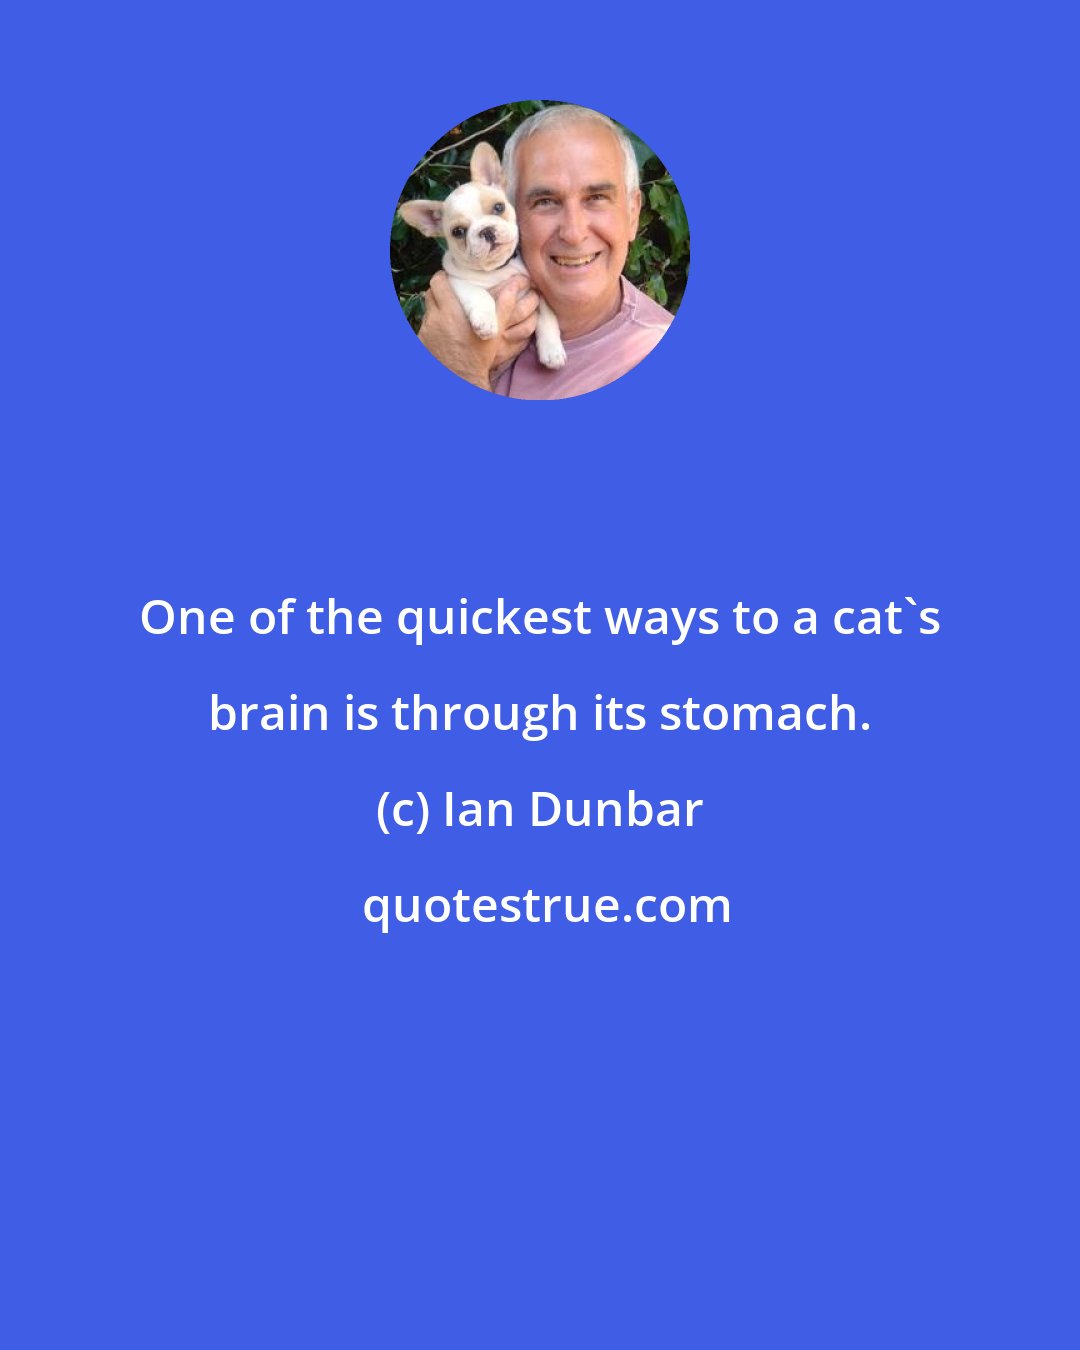 Ian Dunbar: One of the quickest ways to a cat's brain is through its stomach.